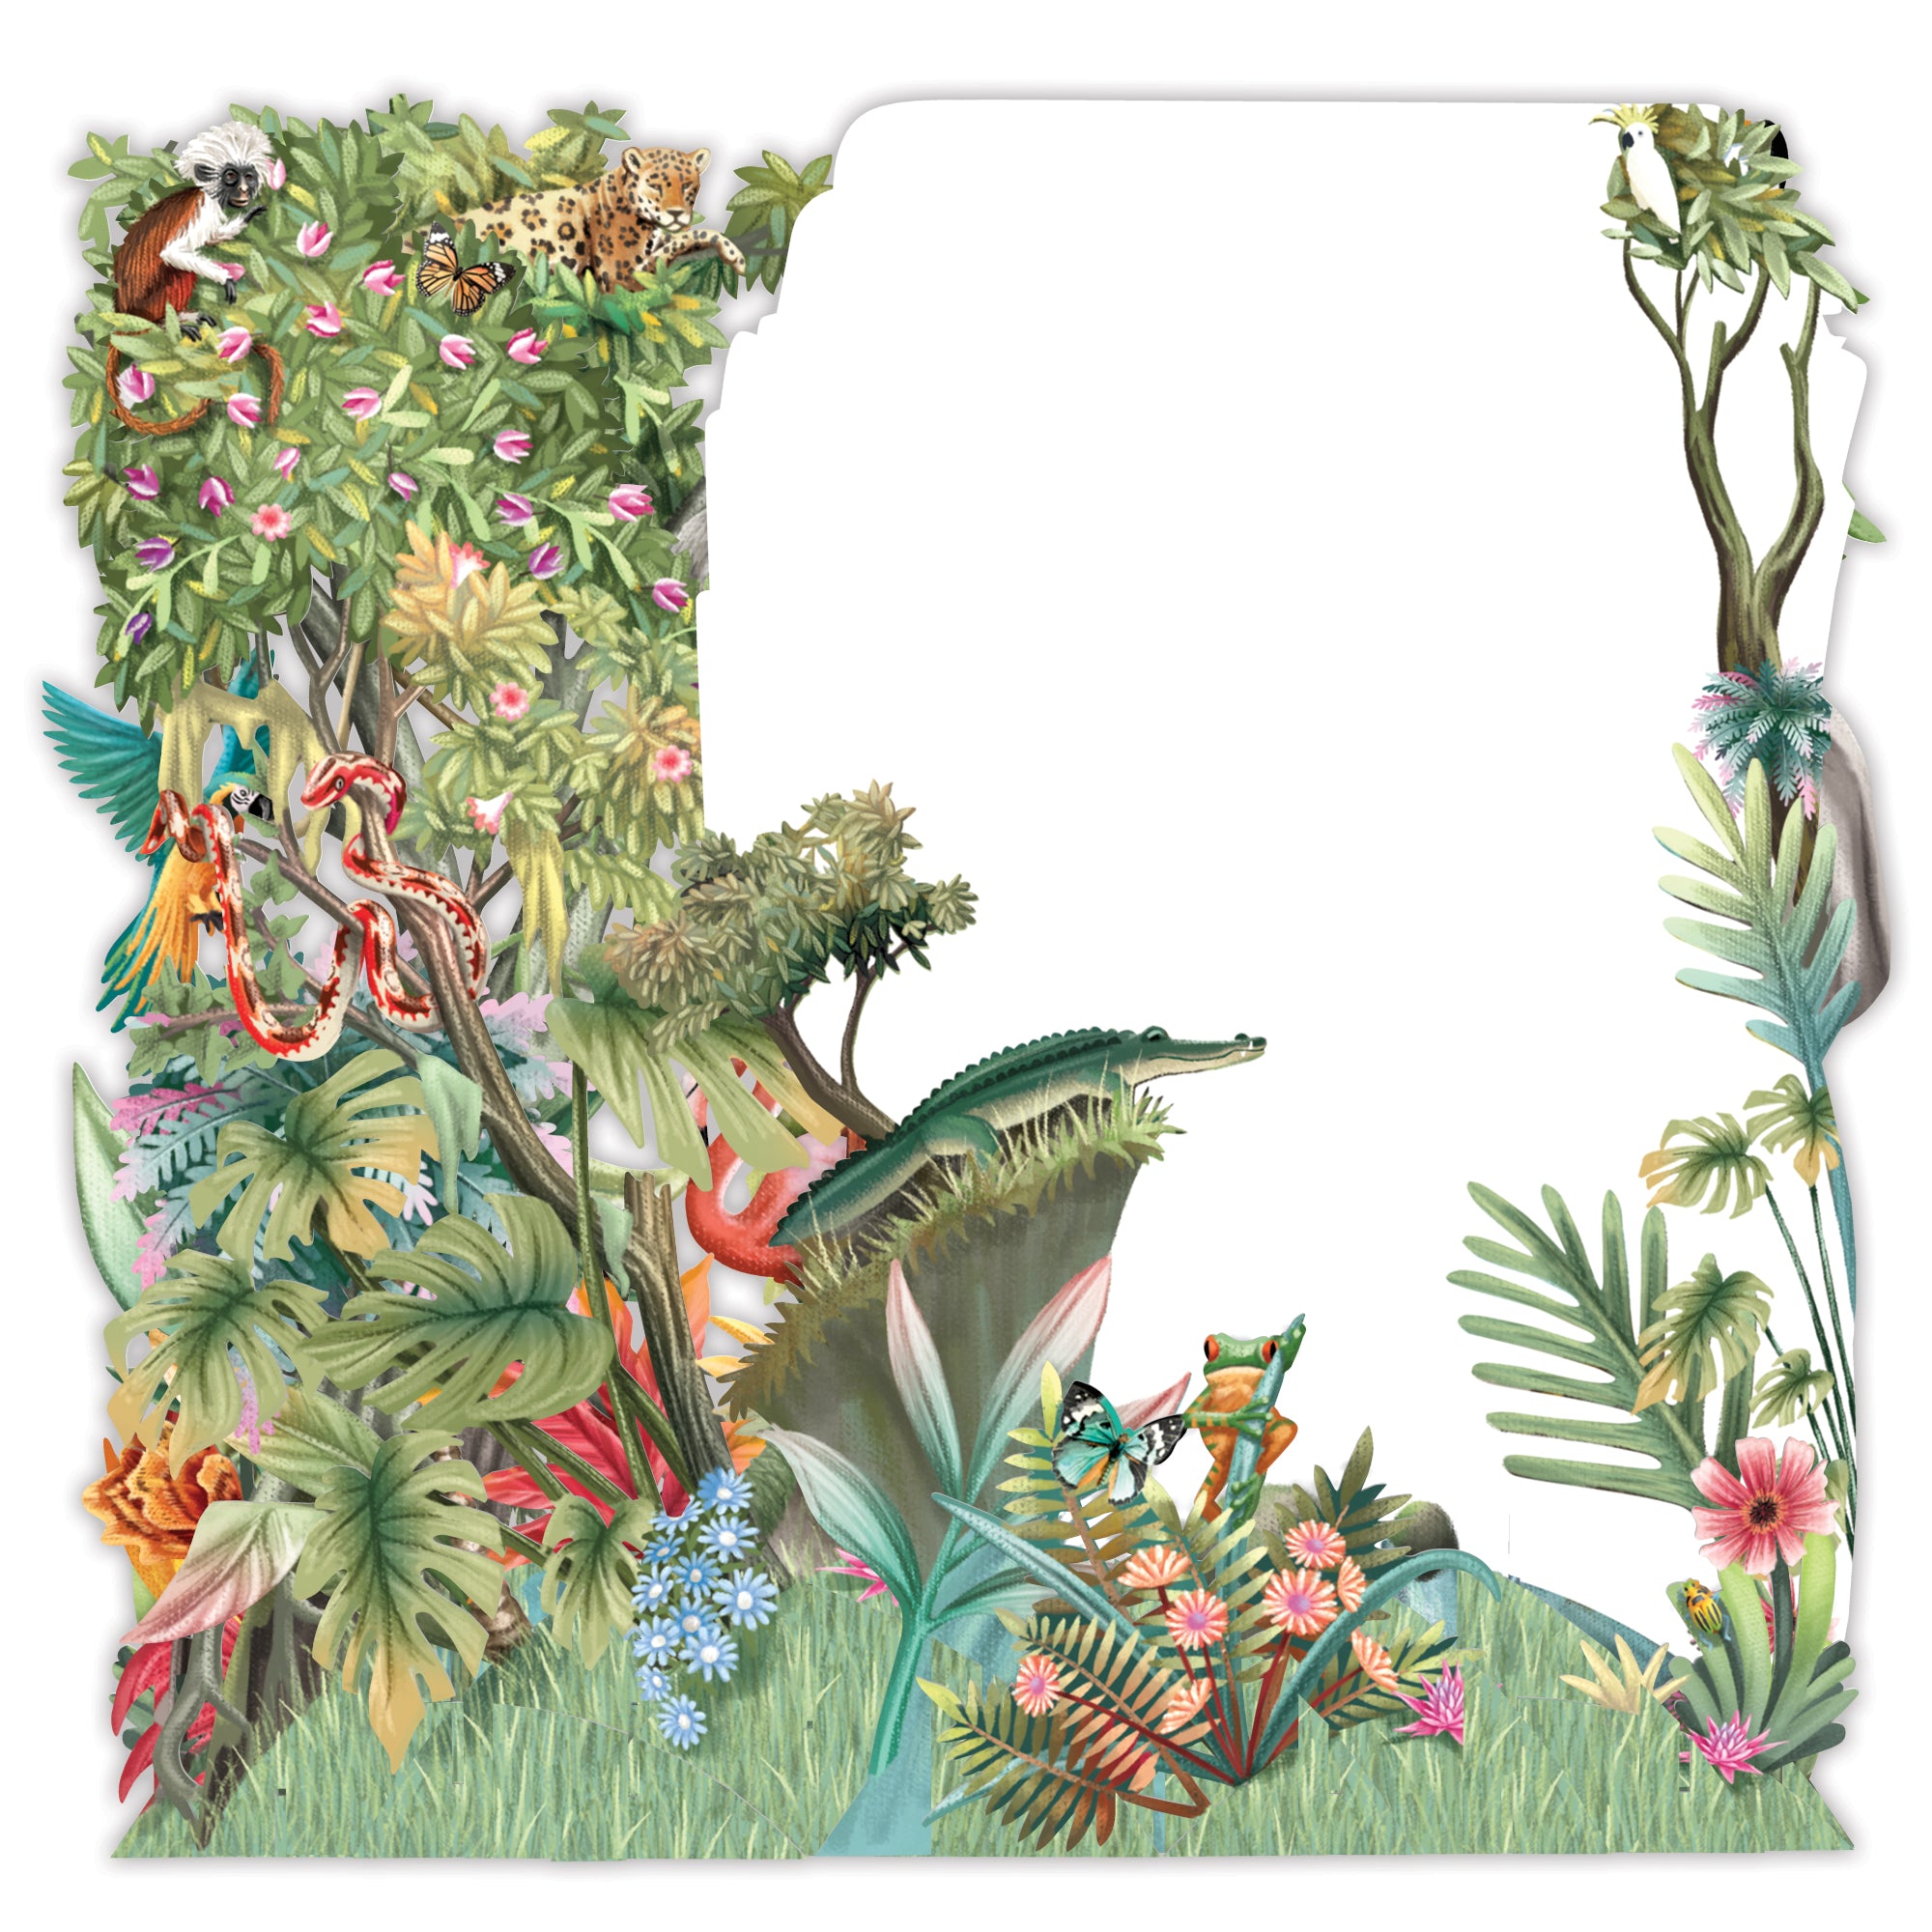 The Jungle - Top of the World Pop Up Greetings Card